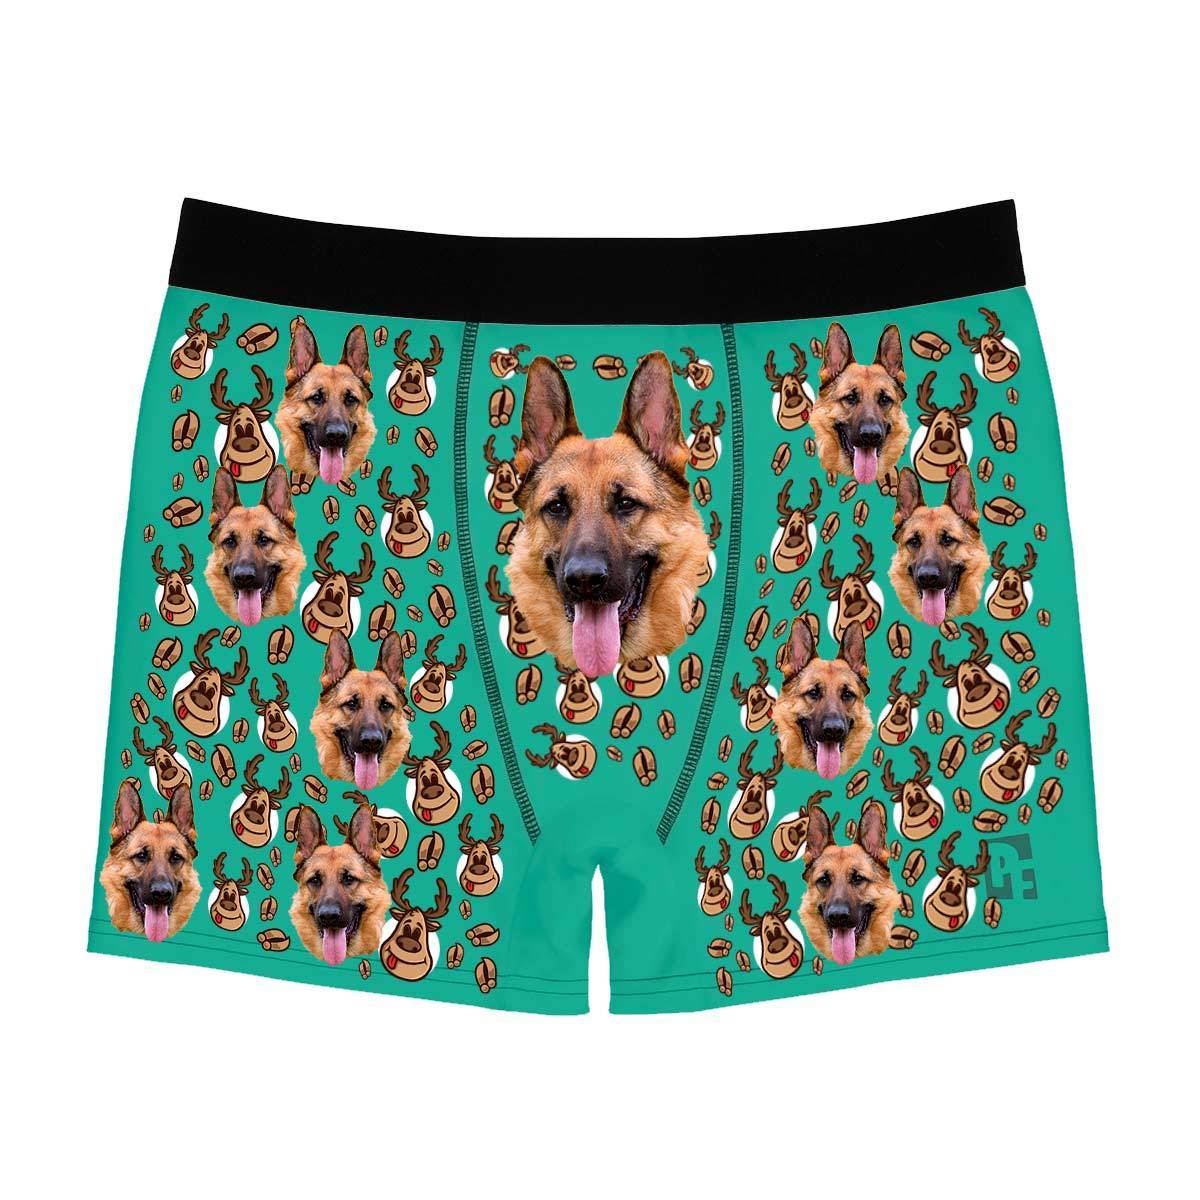 Mint Deer Hunter men's boxer briefs personalized with photo printed on them